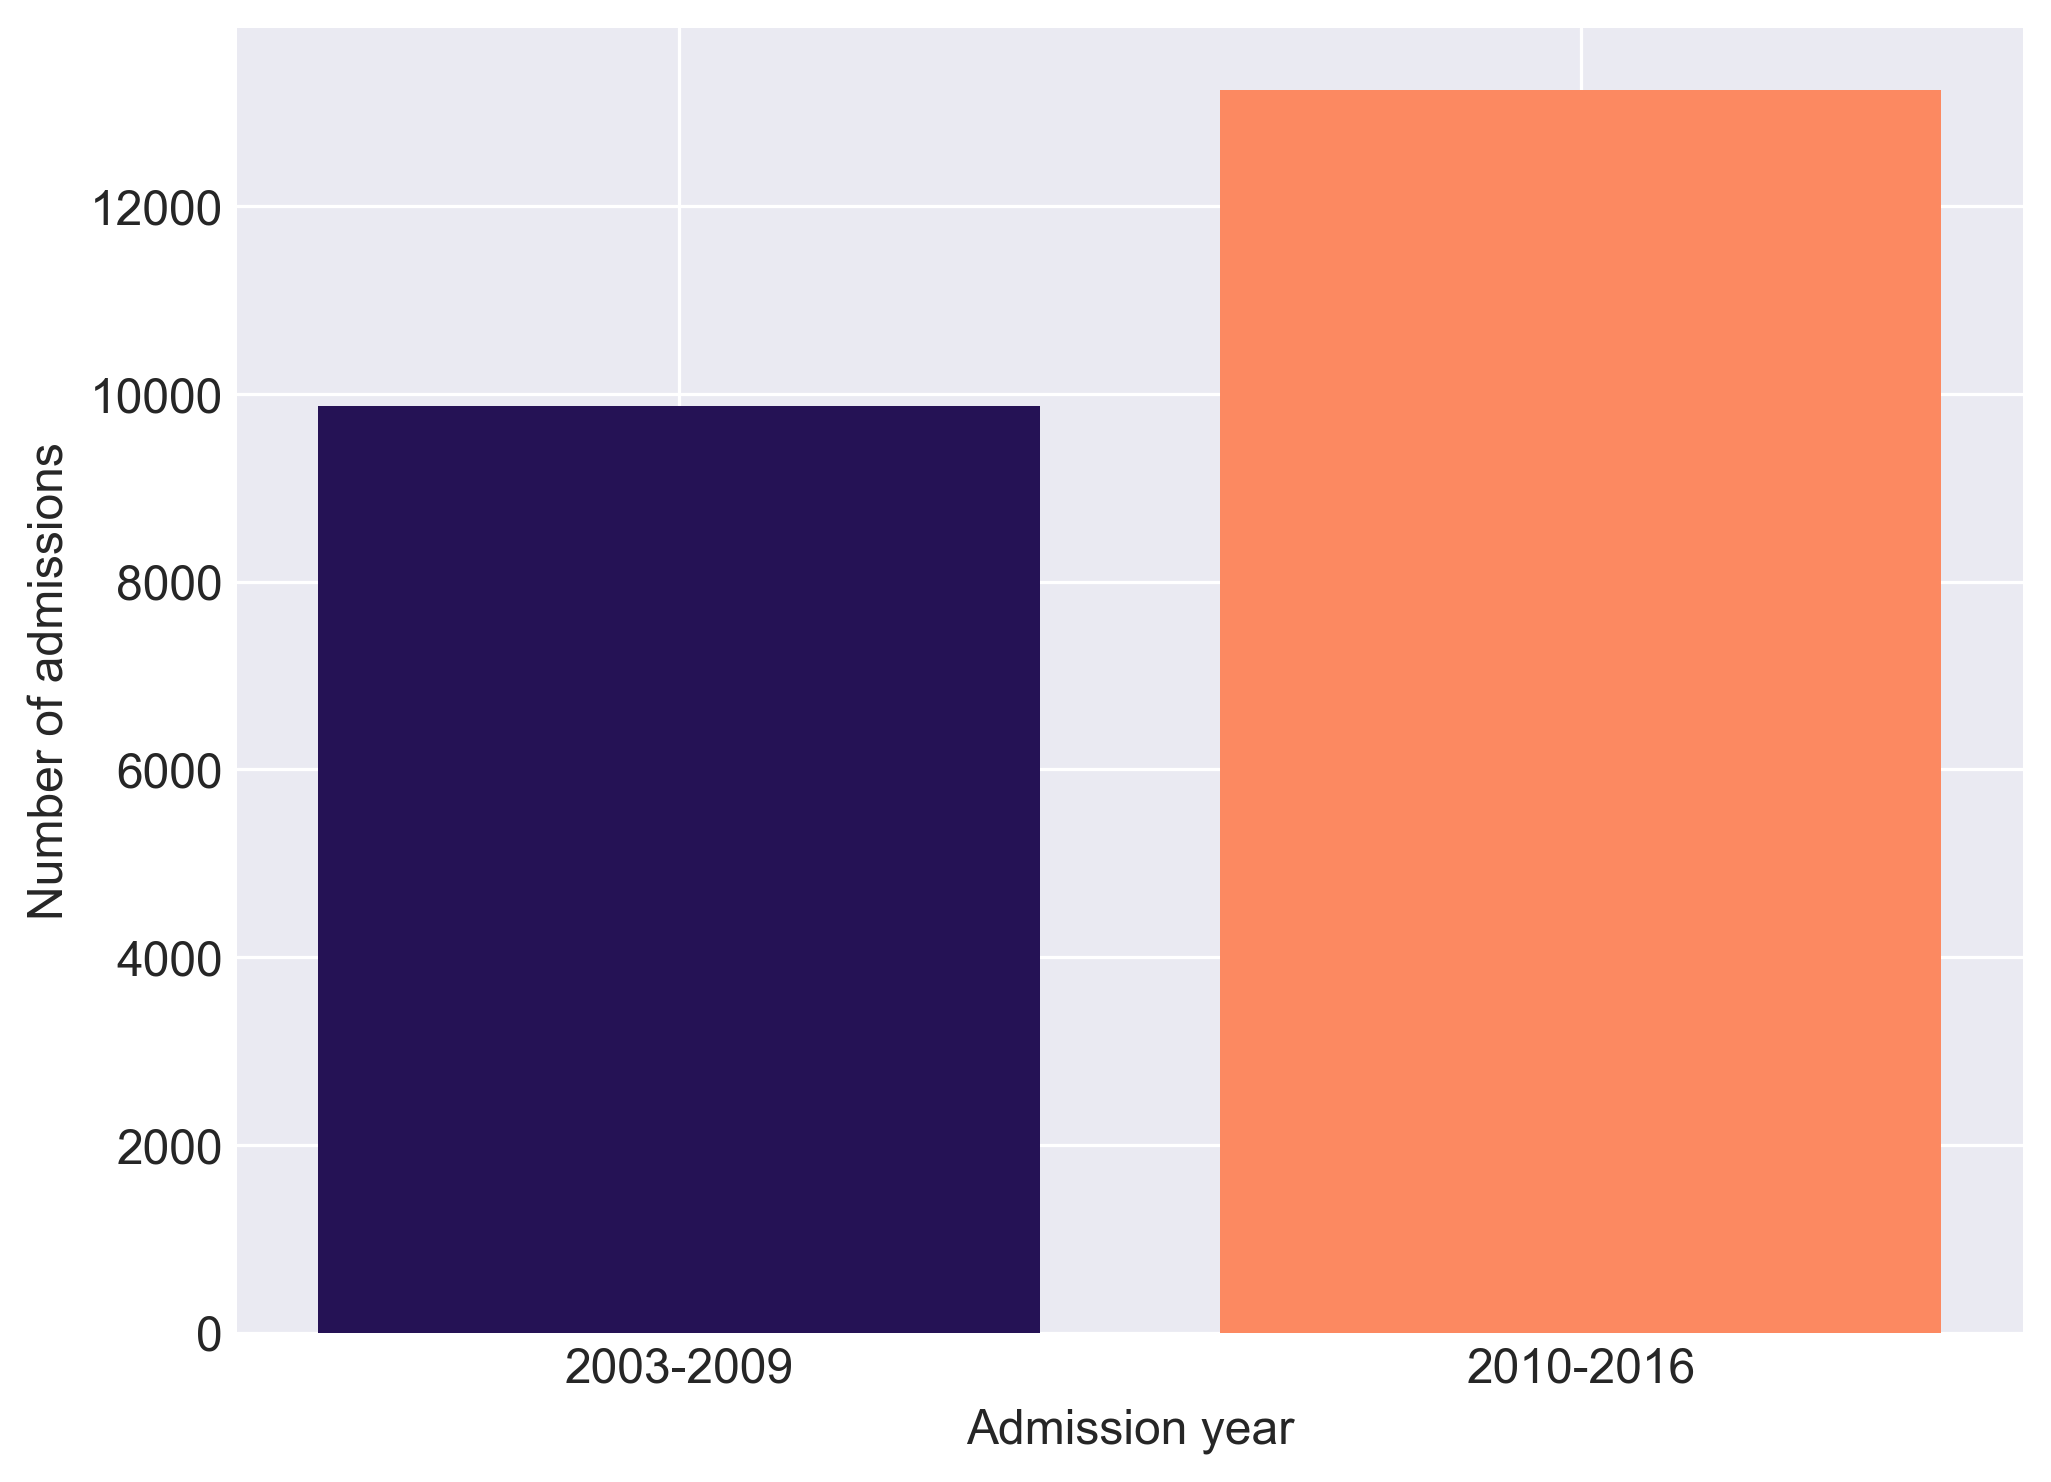 Admissions per year category